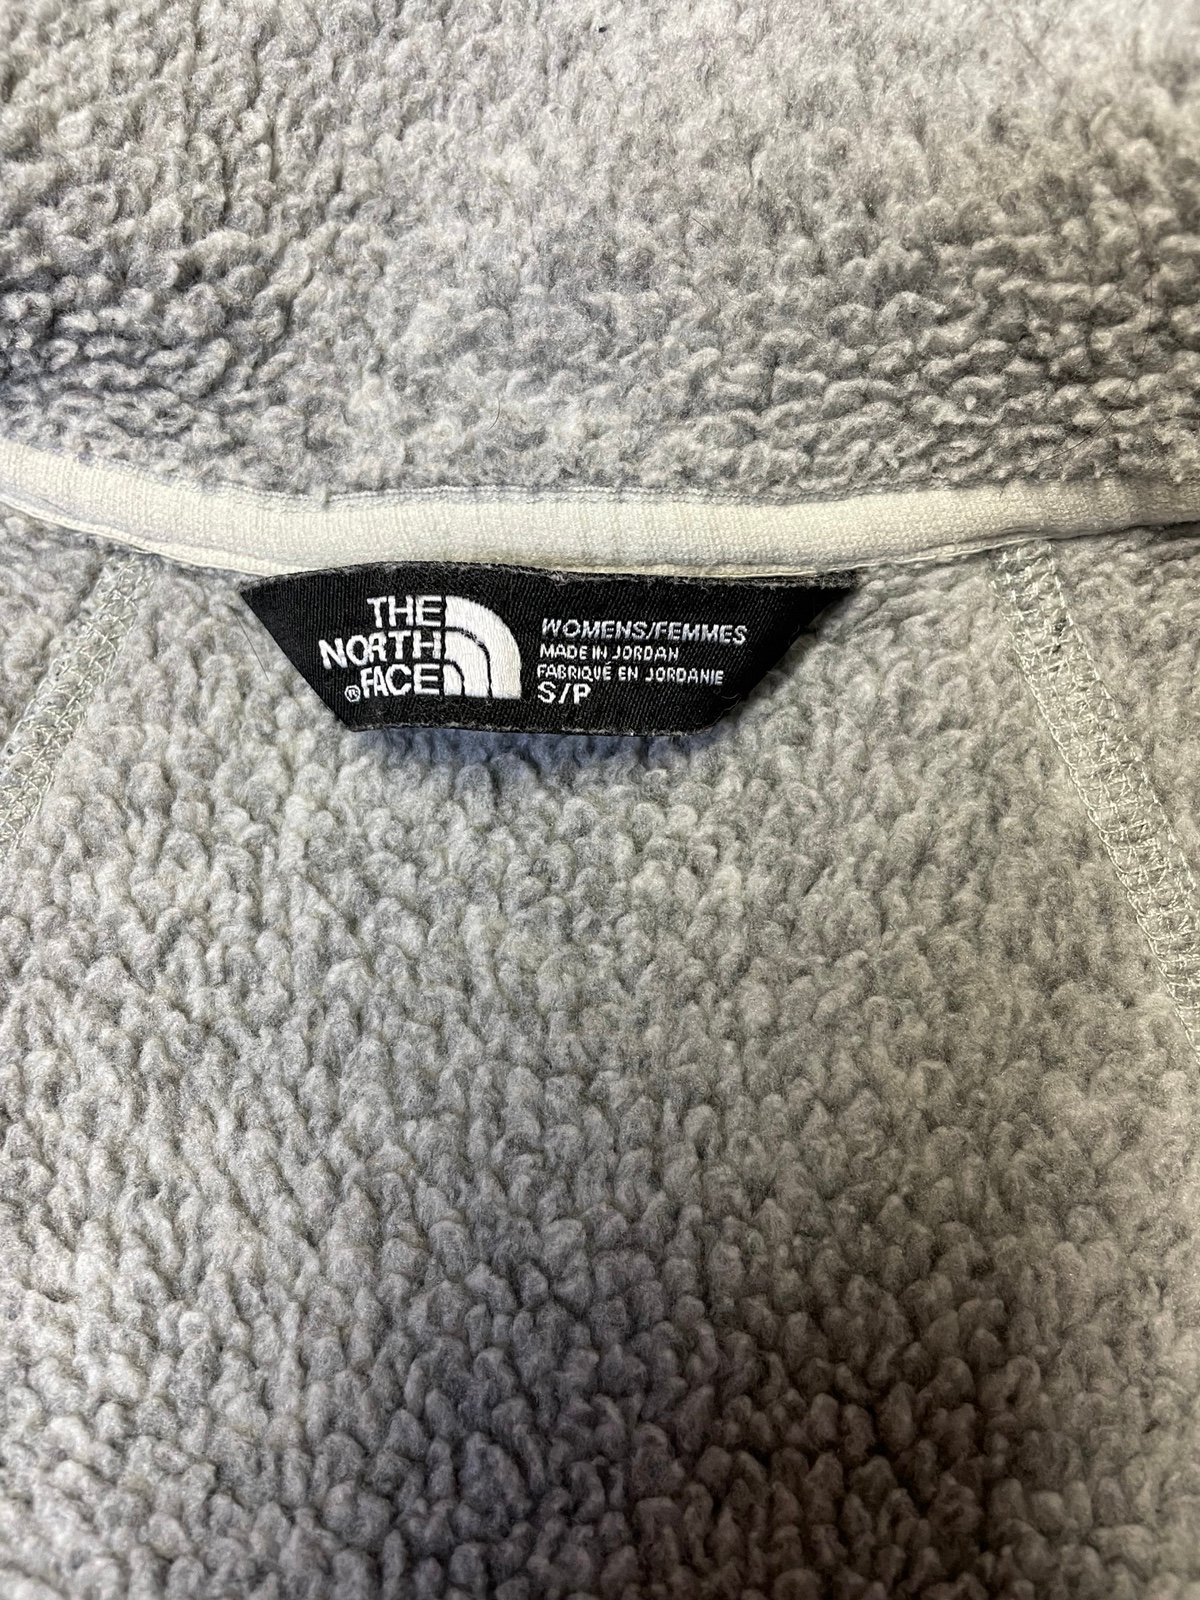 Classic The North Face Gray Full Zip Fleece Jacket Women´s Size Small JsFIG89oZ online store